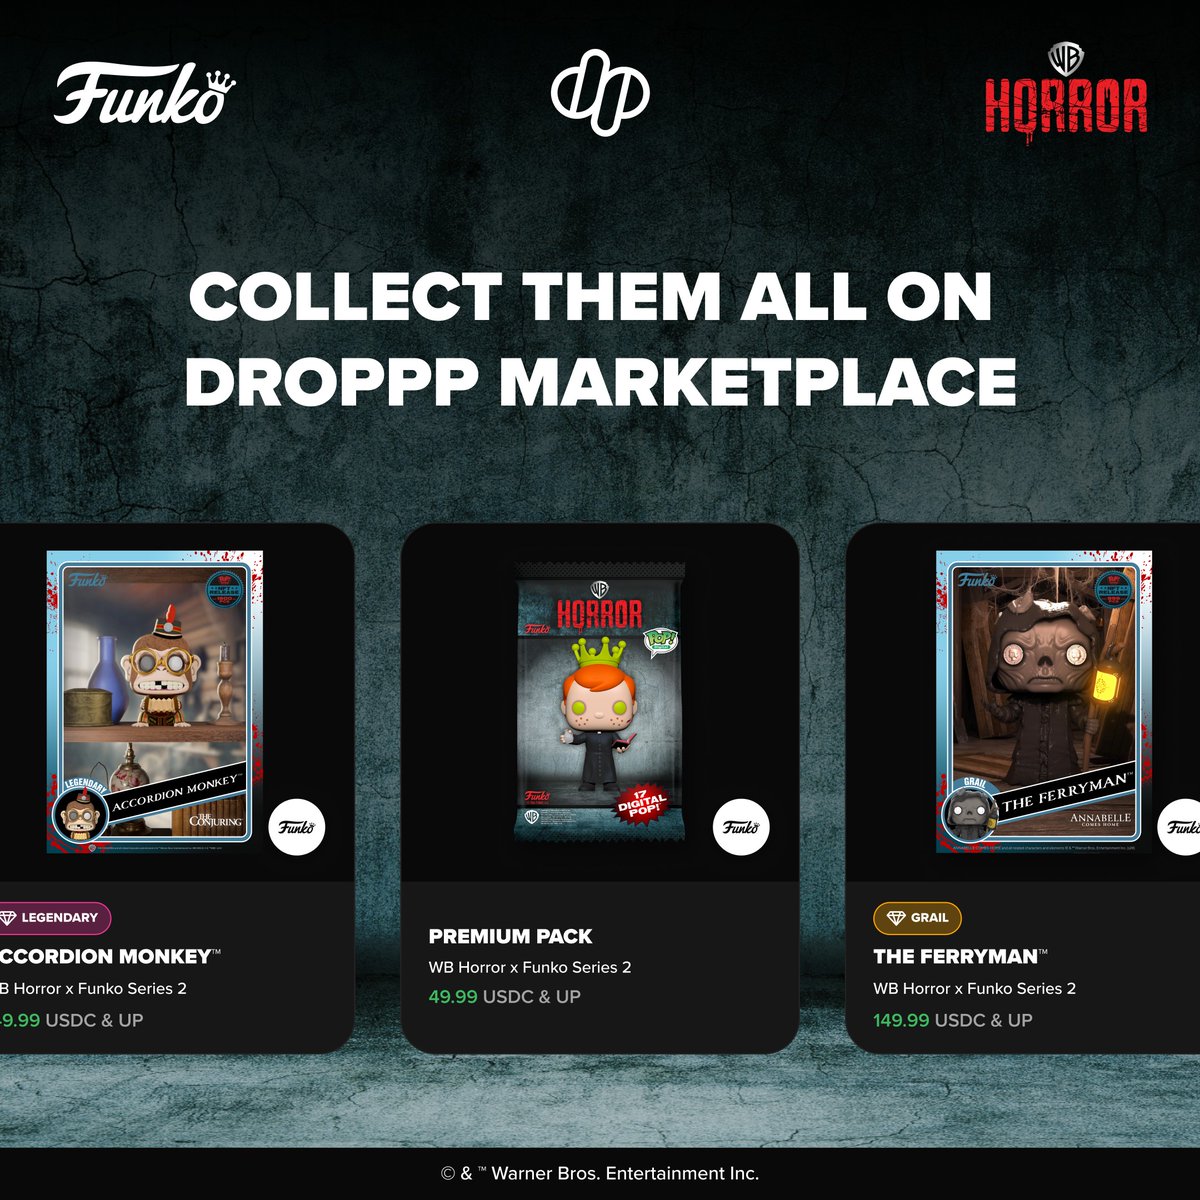 WB Horror x Funko Series 2 is now available on Droppp Marketplace! Complete your collection now on Droppp.io! @OriginalFunko #Funko #DigitalPop #DigitalCollectibles #Droppp #WBHorror